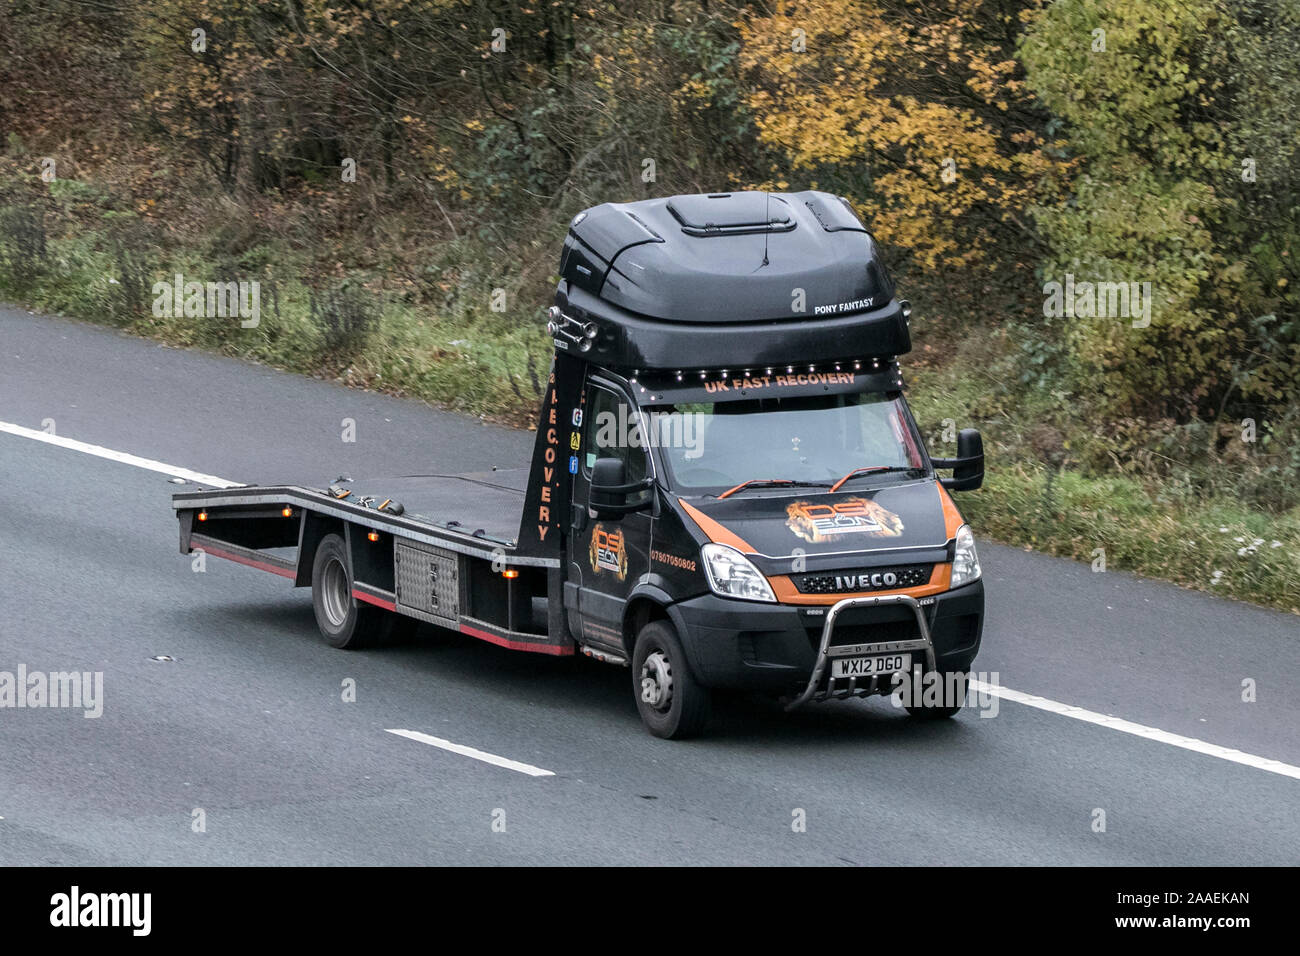 Iveco flatbed breakdown recovery truck Stock Photo